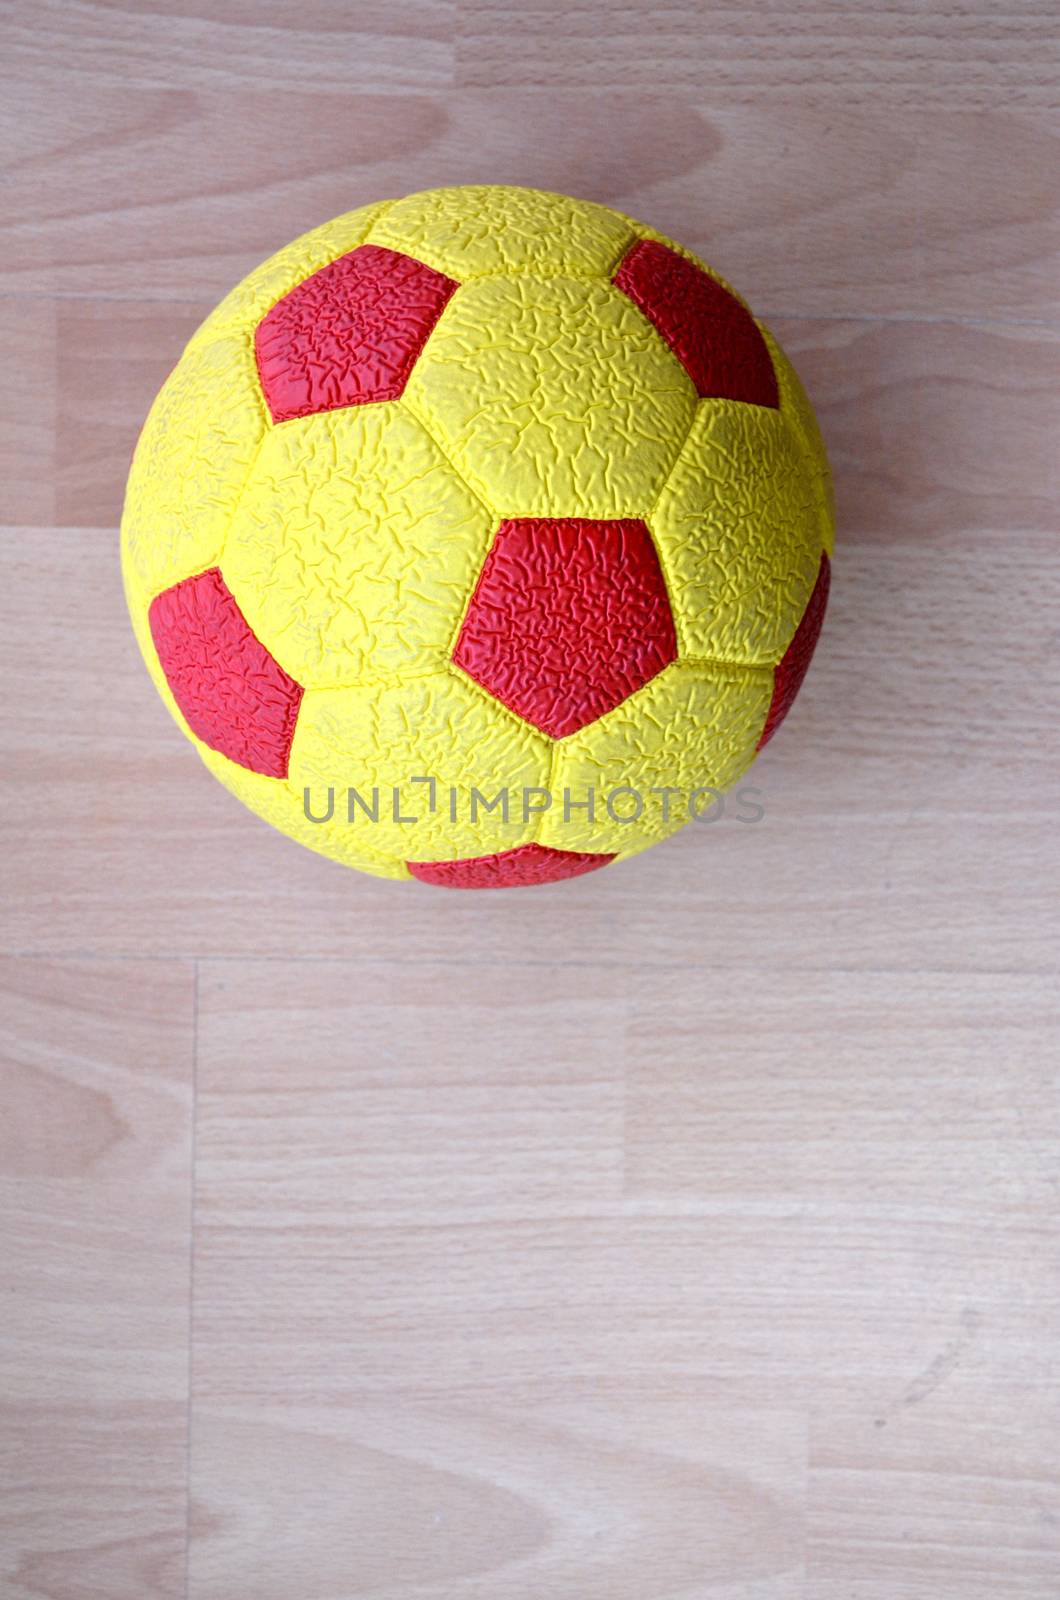 picture of a Red and yellow Soccer Ball on a wooden background